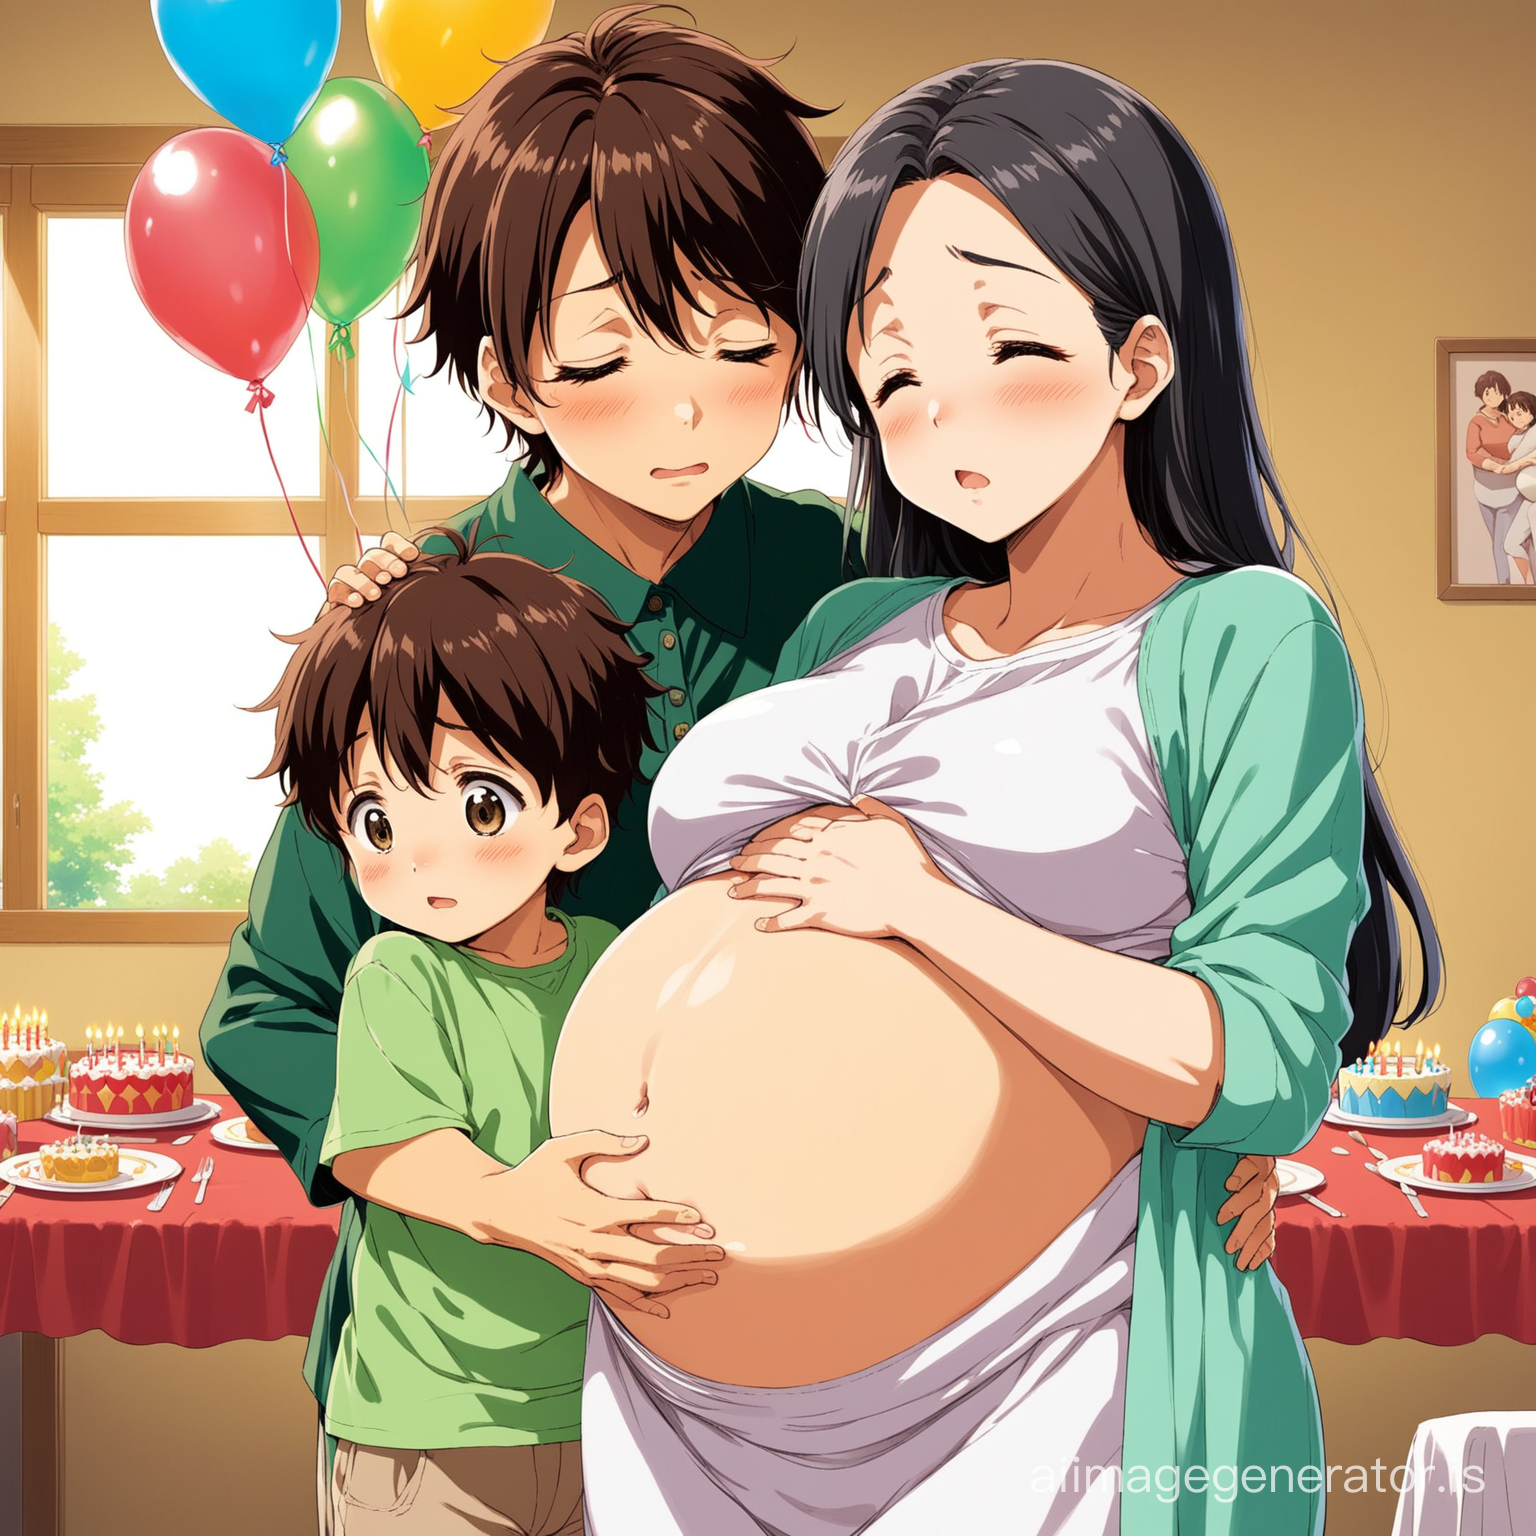 (ghibli anime) pregnant mother hurts at contractions with little son hugging his mommy's stomach in (birthday party)